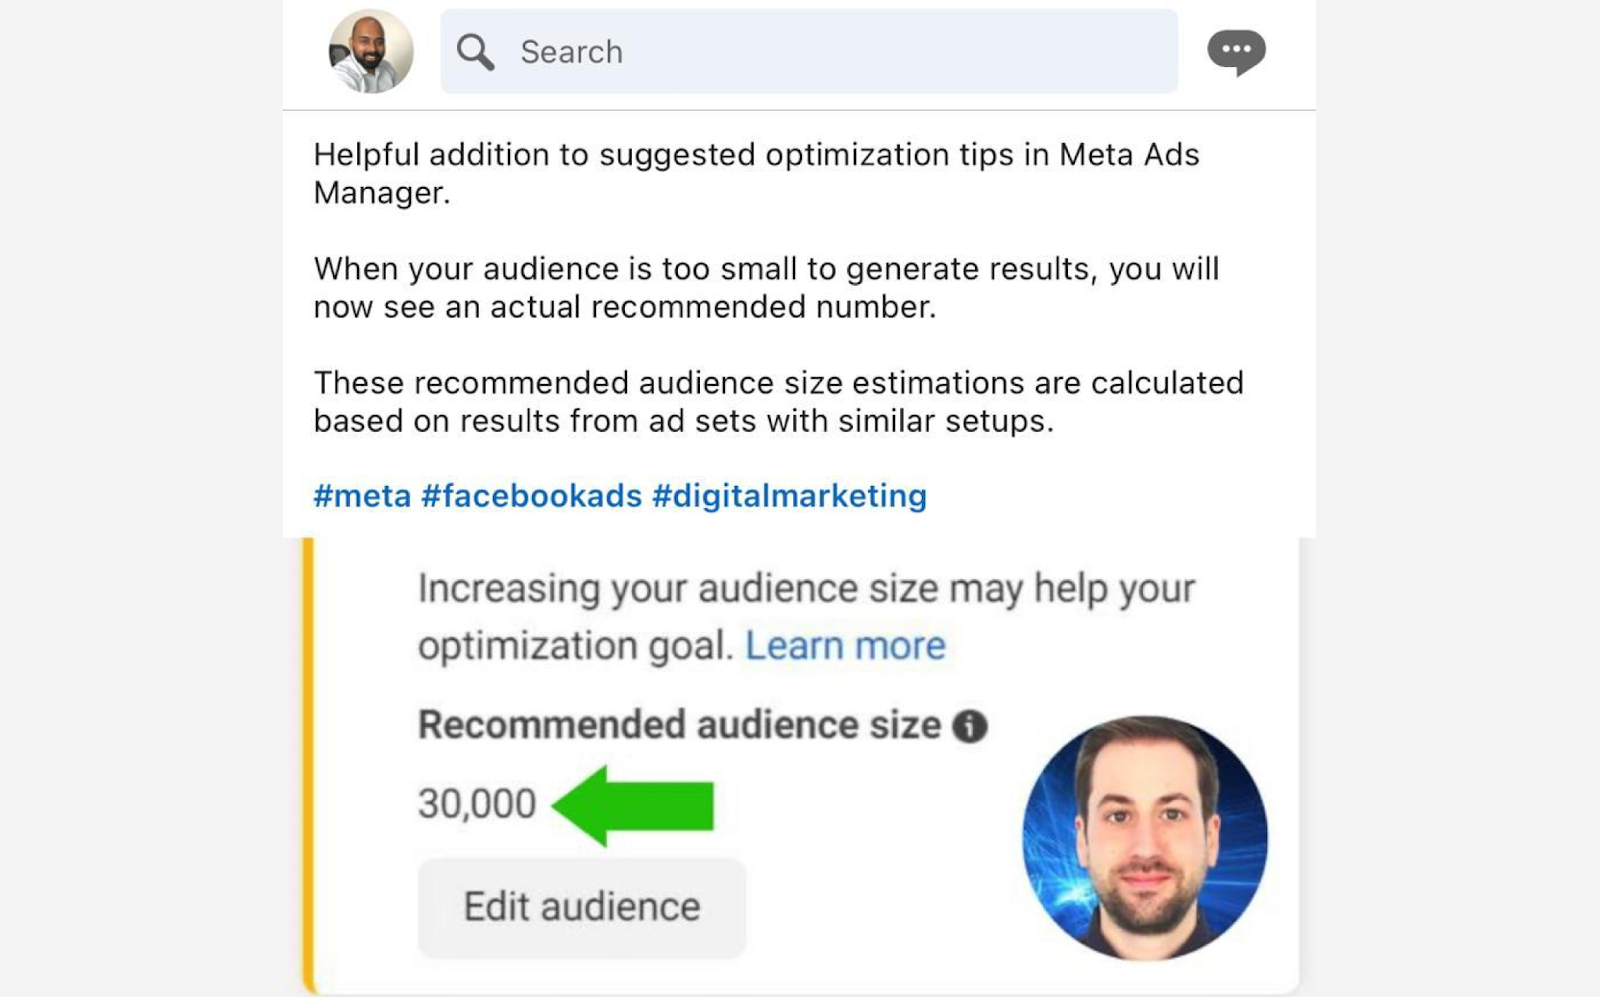 When the audience size is too small to generate results, you will now see an actual recommended number. 